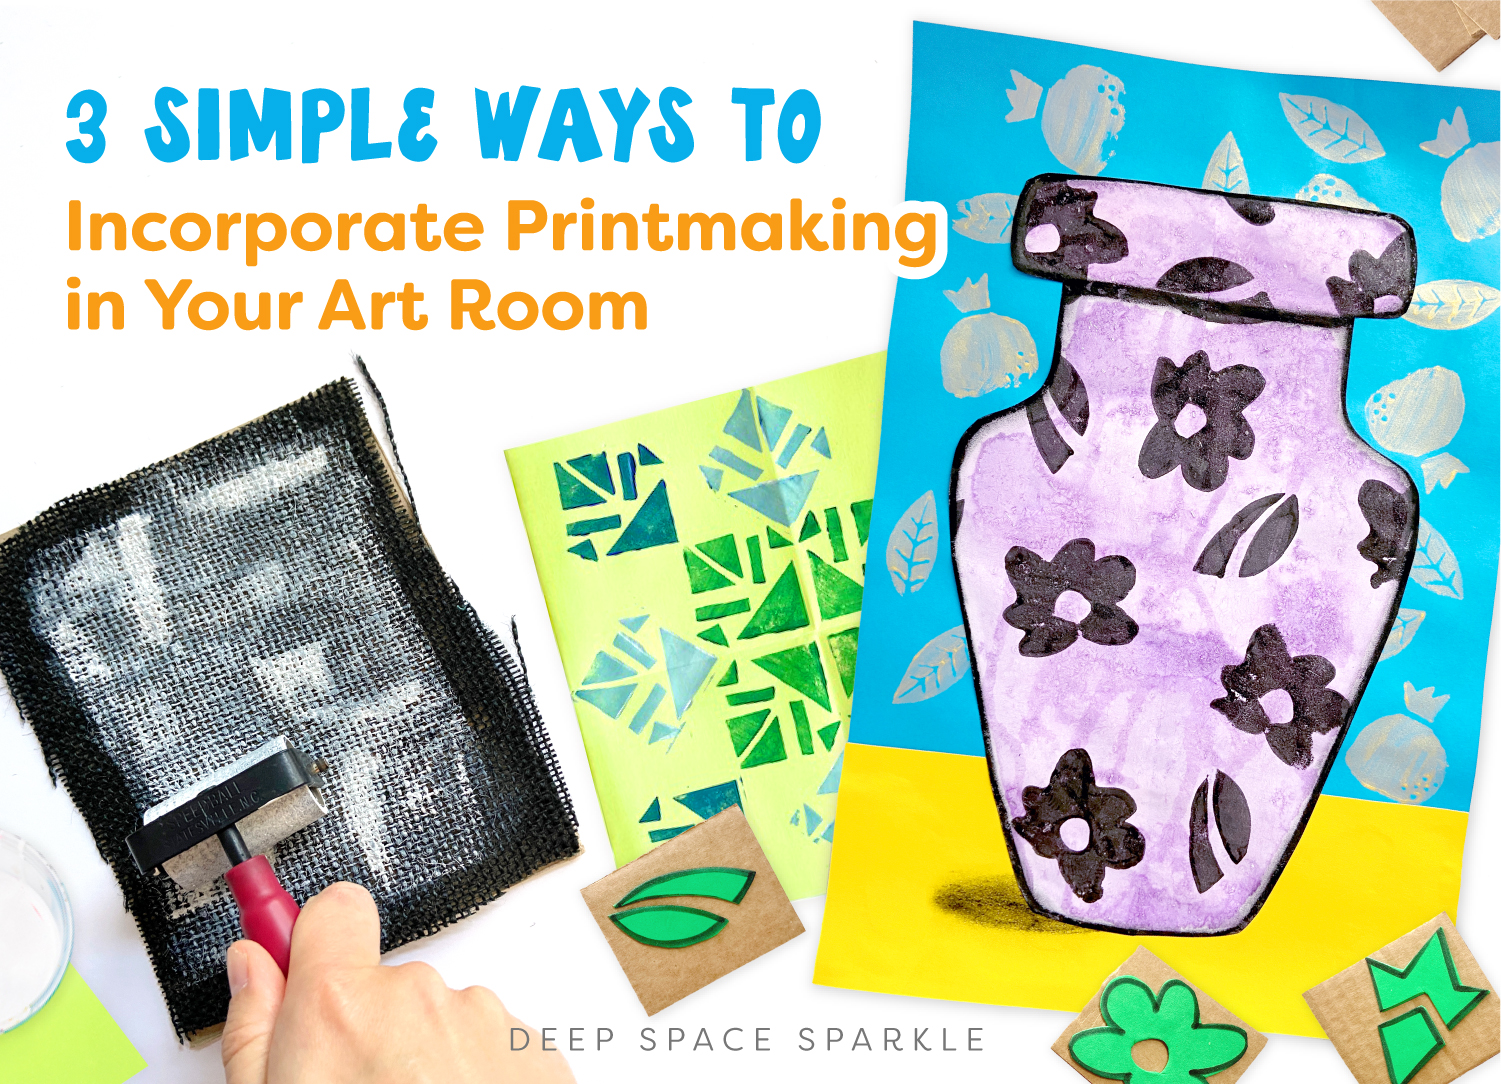 3 Simple Ways to Incorporate Printmaking in Your Art Room